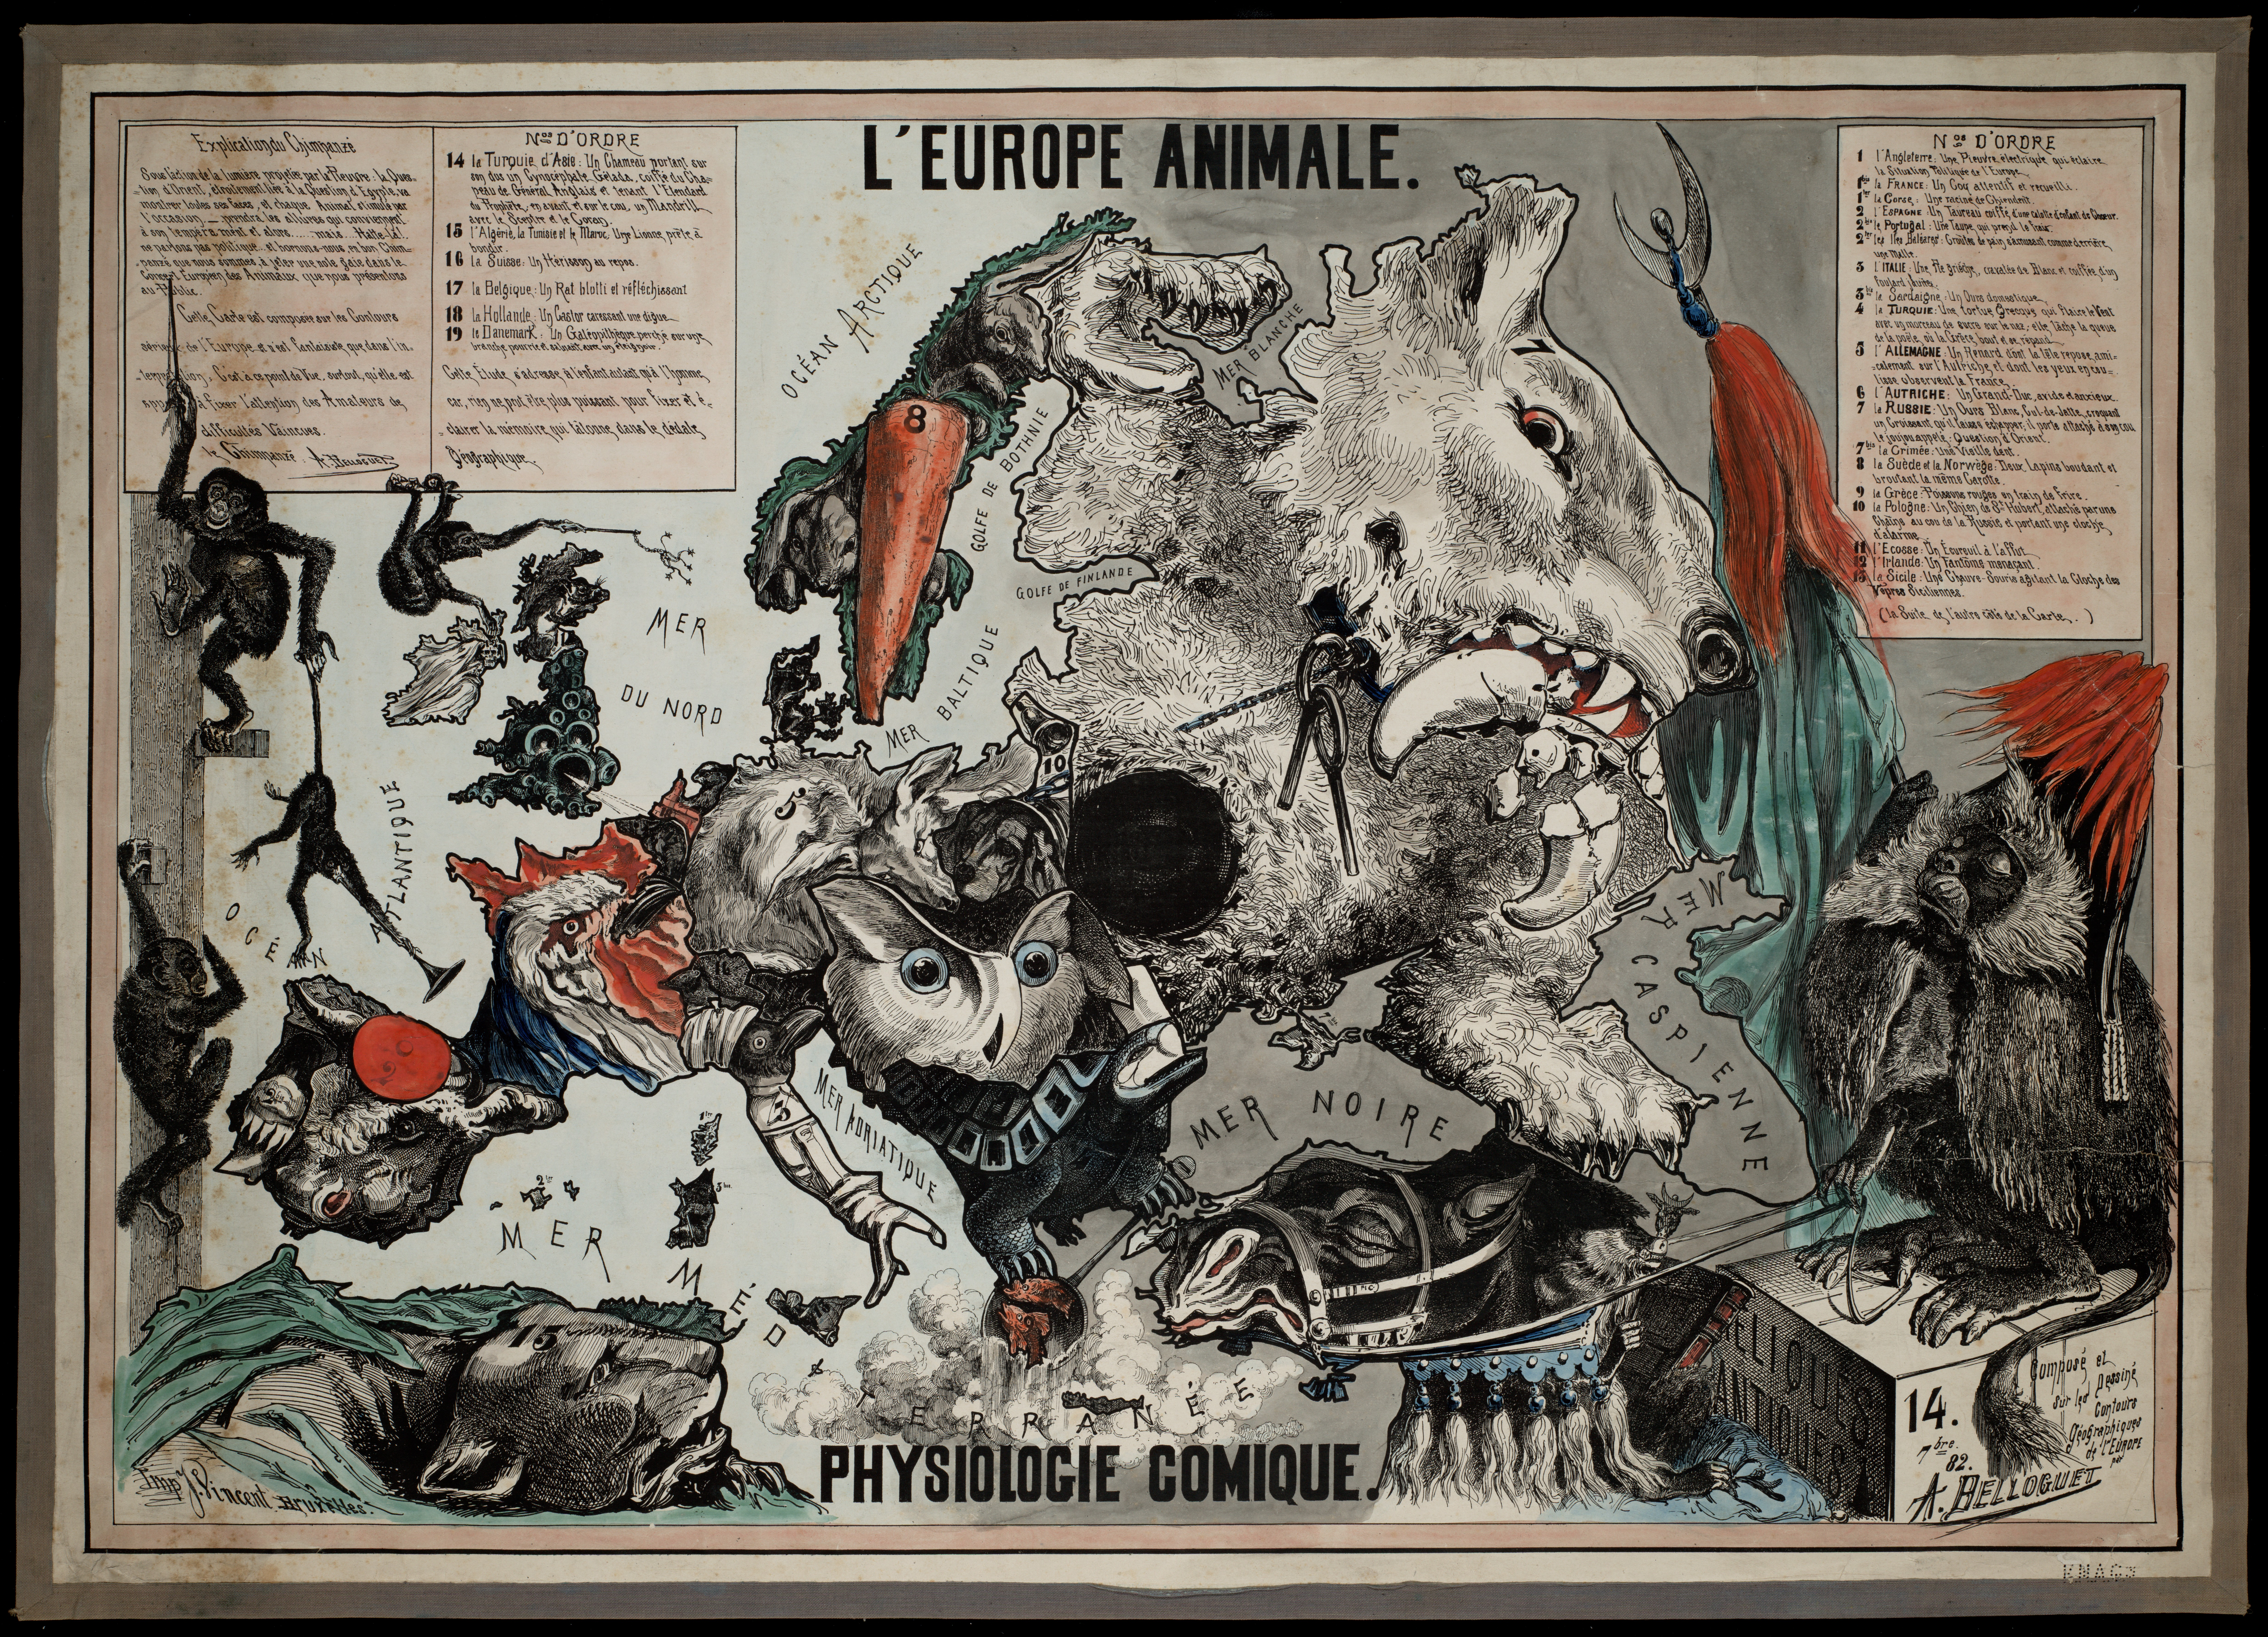 Animal Europe - Comic Physiology of Europe (L'Europe Animale - Physiologie Comique)